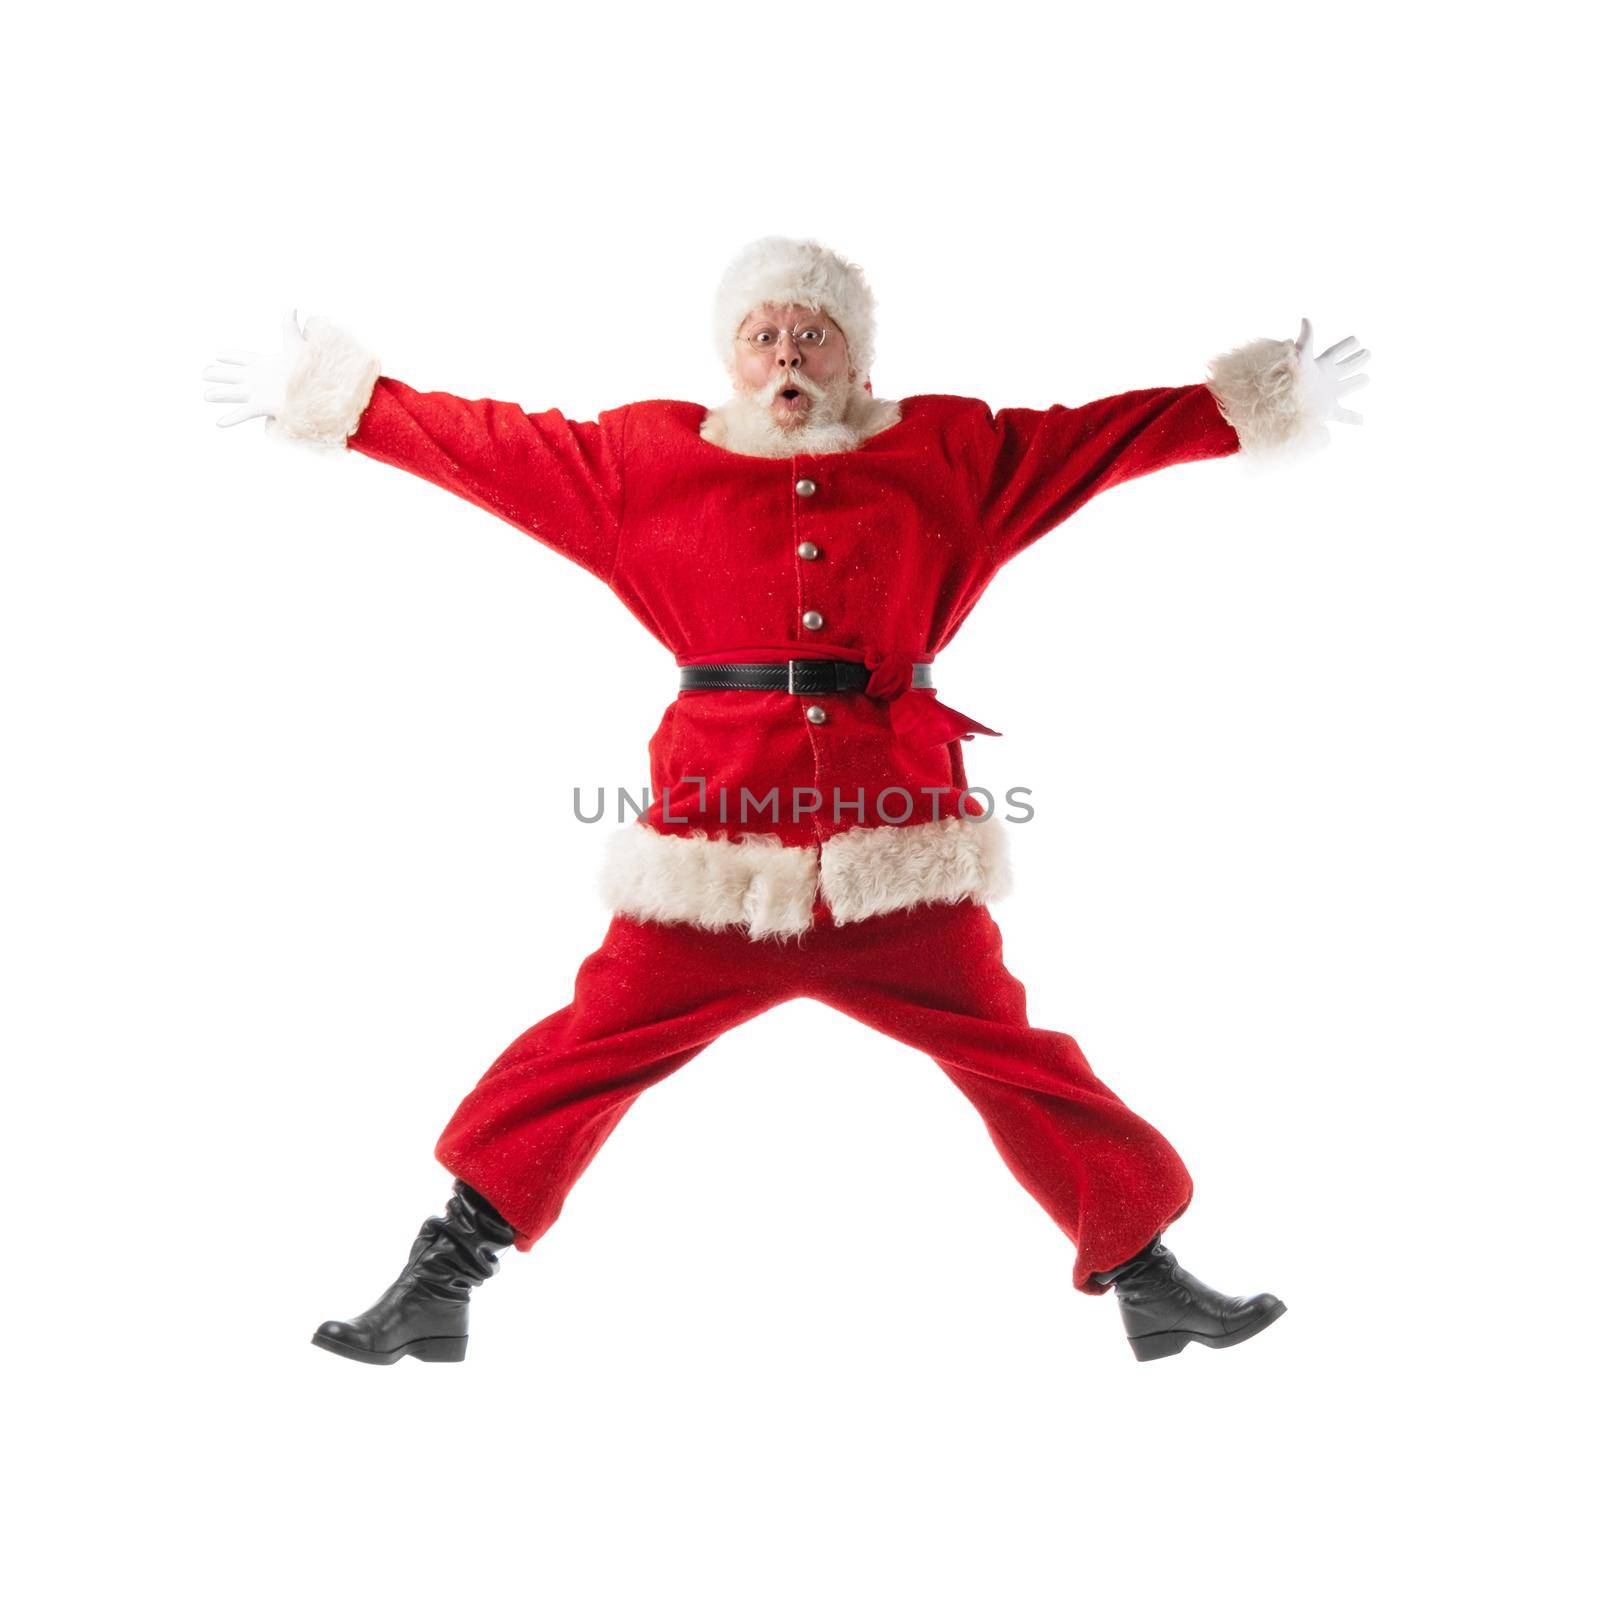 Santa Claus jumping with hands lifted upwards isolated on white background